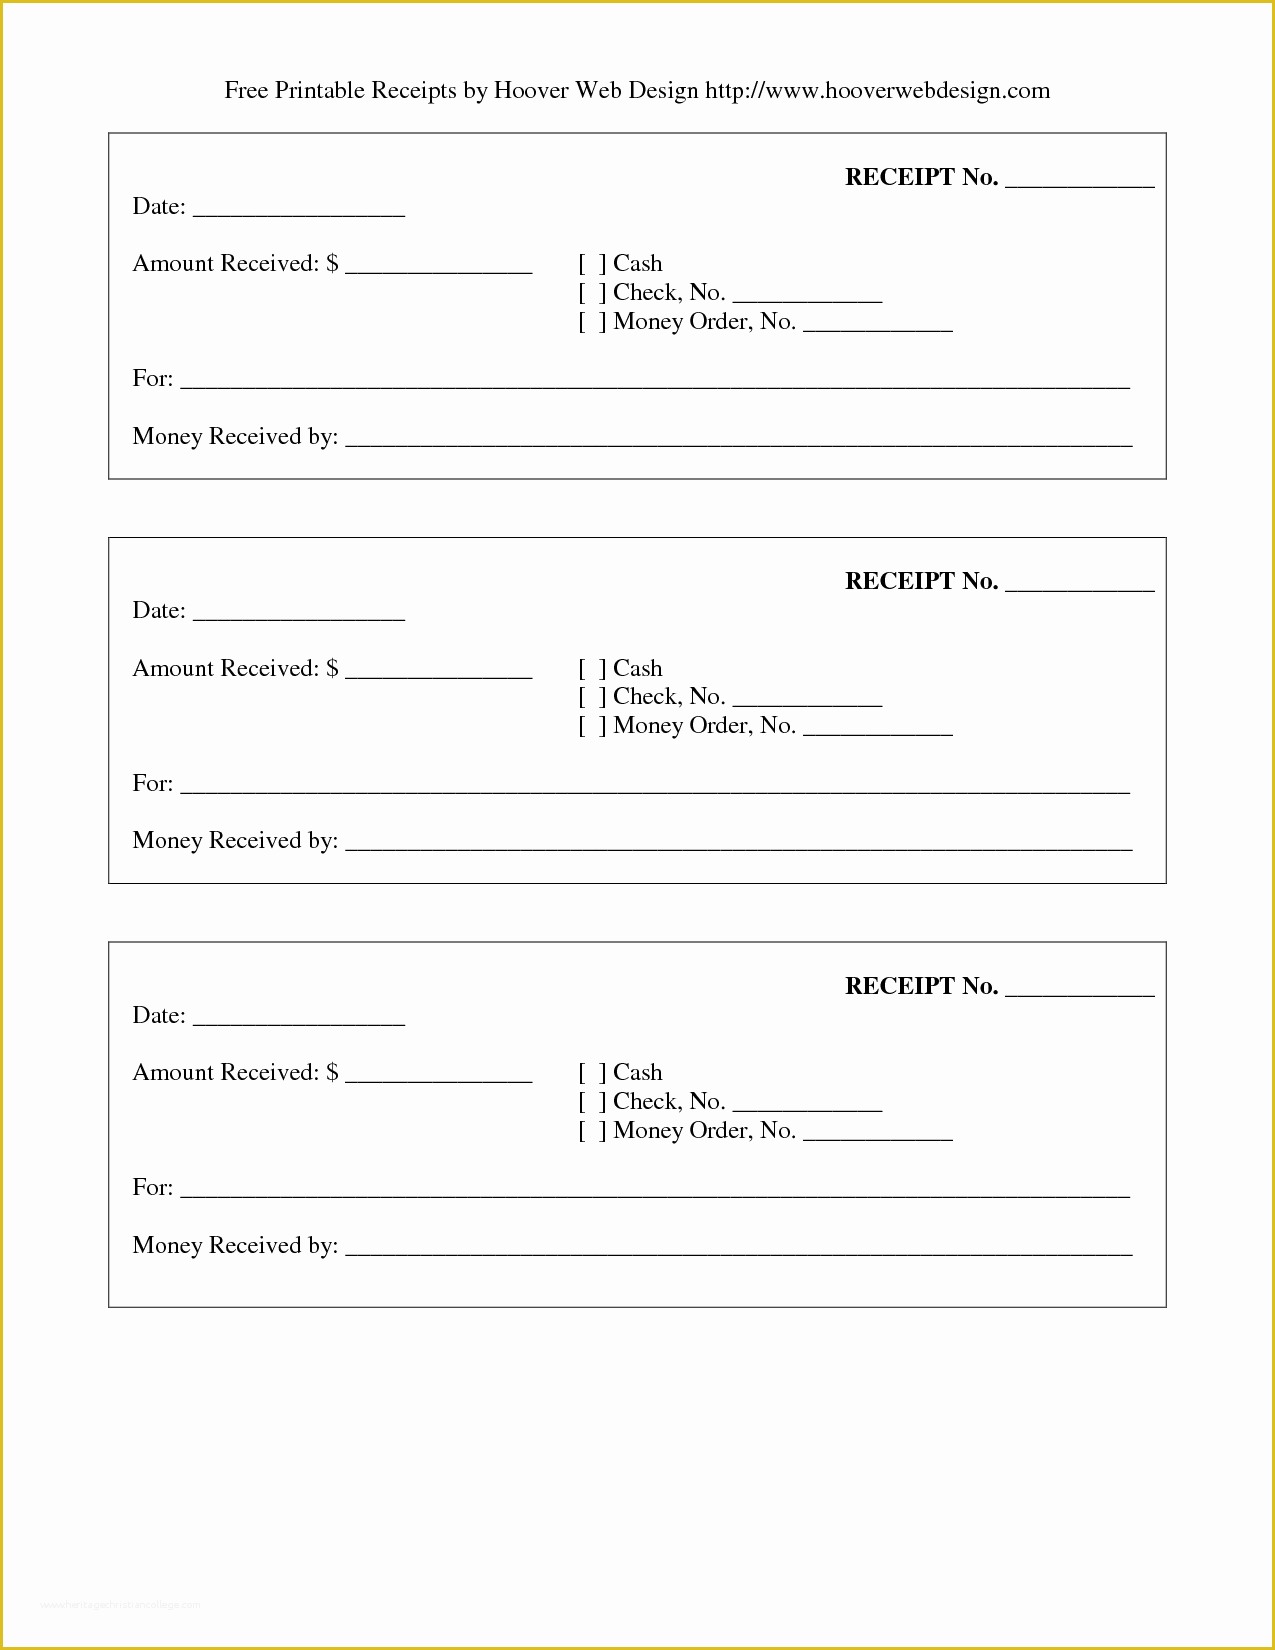 Free Receipt Template Of 11 Best Of Free Printable Payment Receipt form